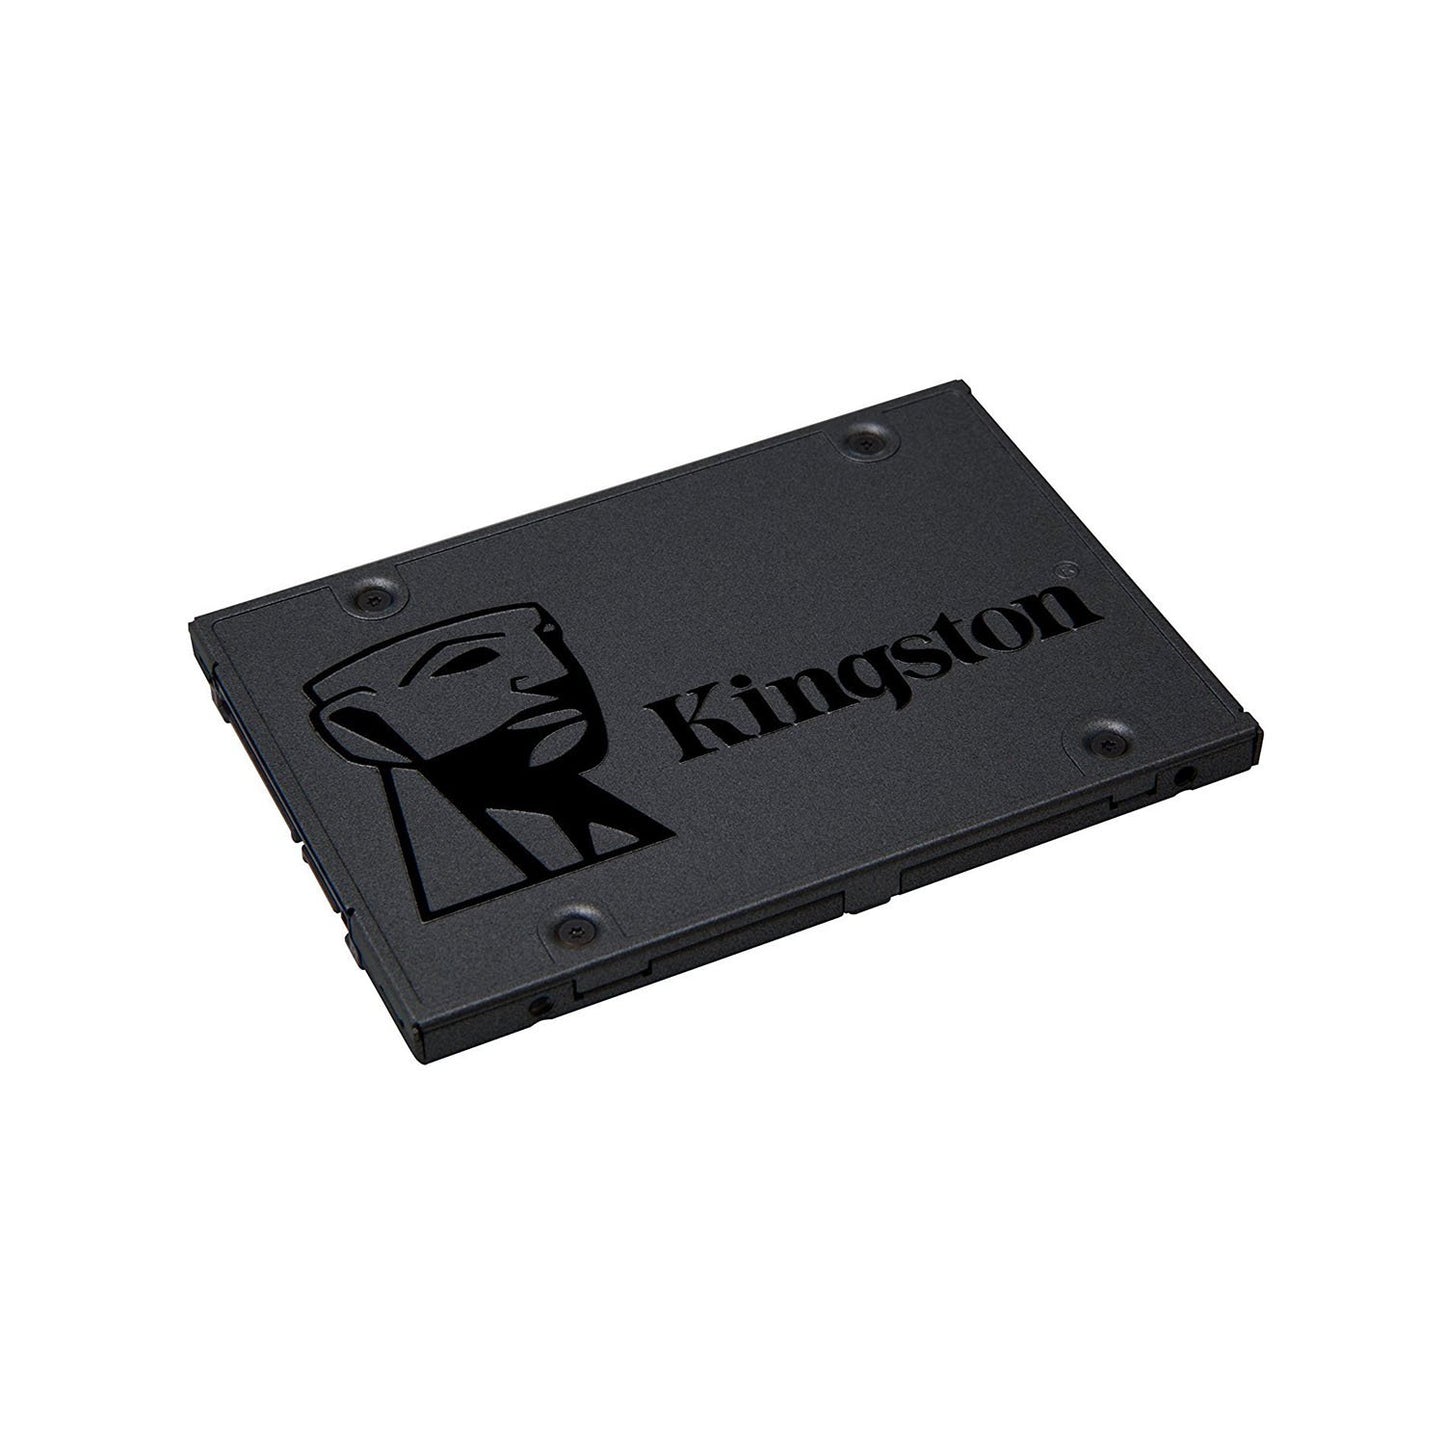 [RePacked] Kingston A400 480GB 2.5 Inch Internal Solid State Drive